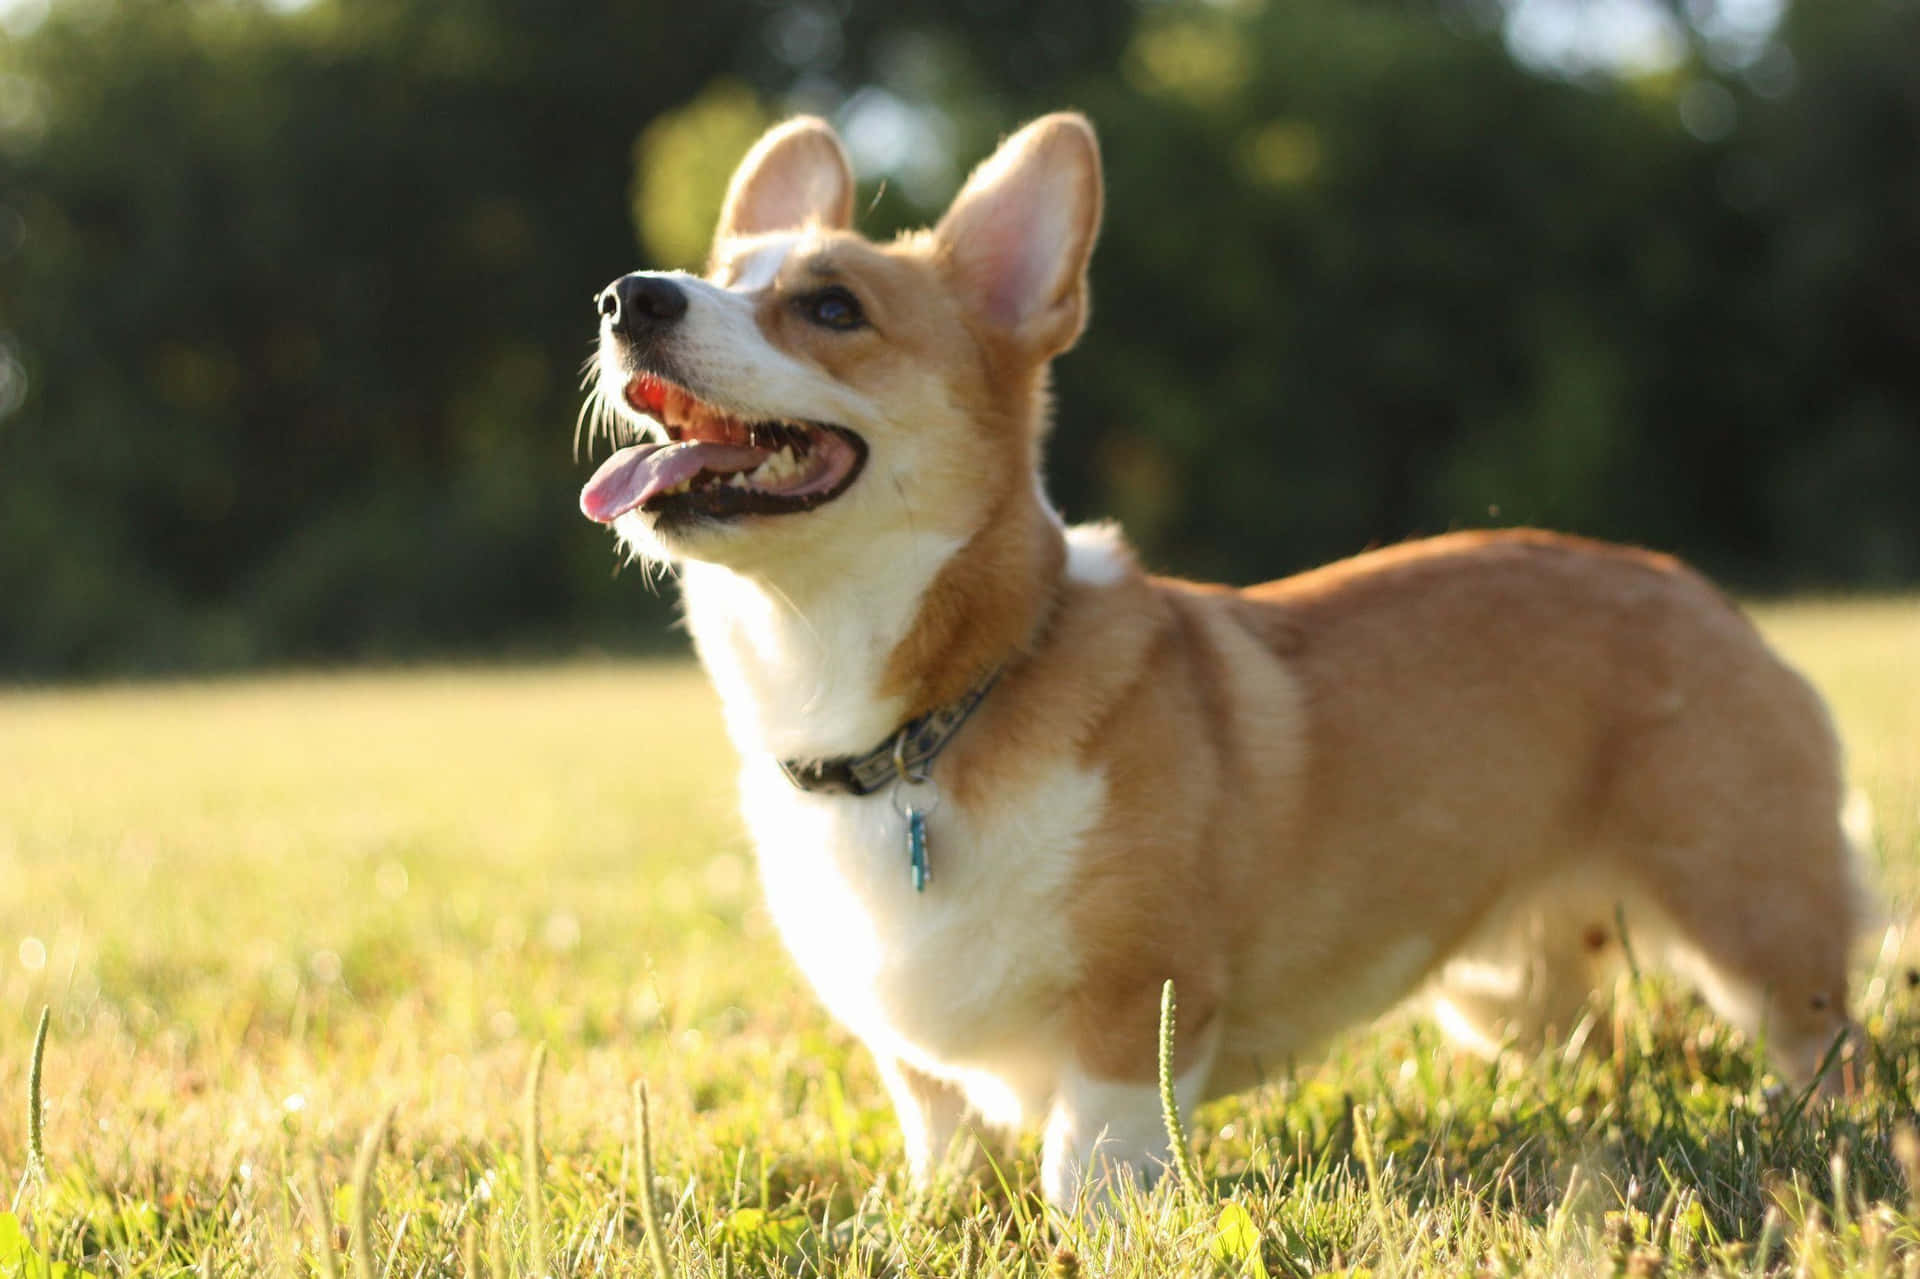 Show your pup some extra love with this fluffy Corgi in the background